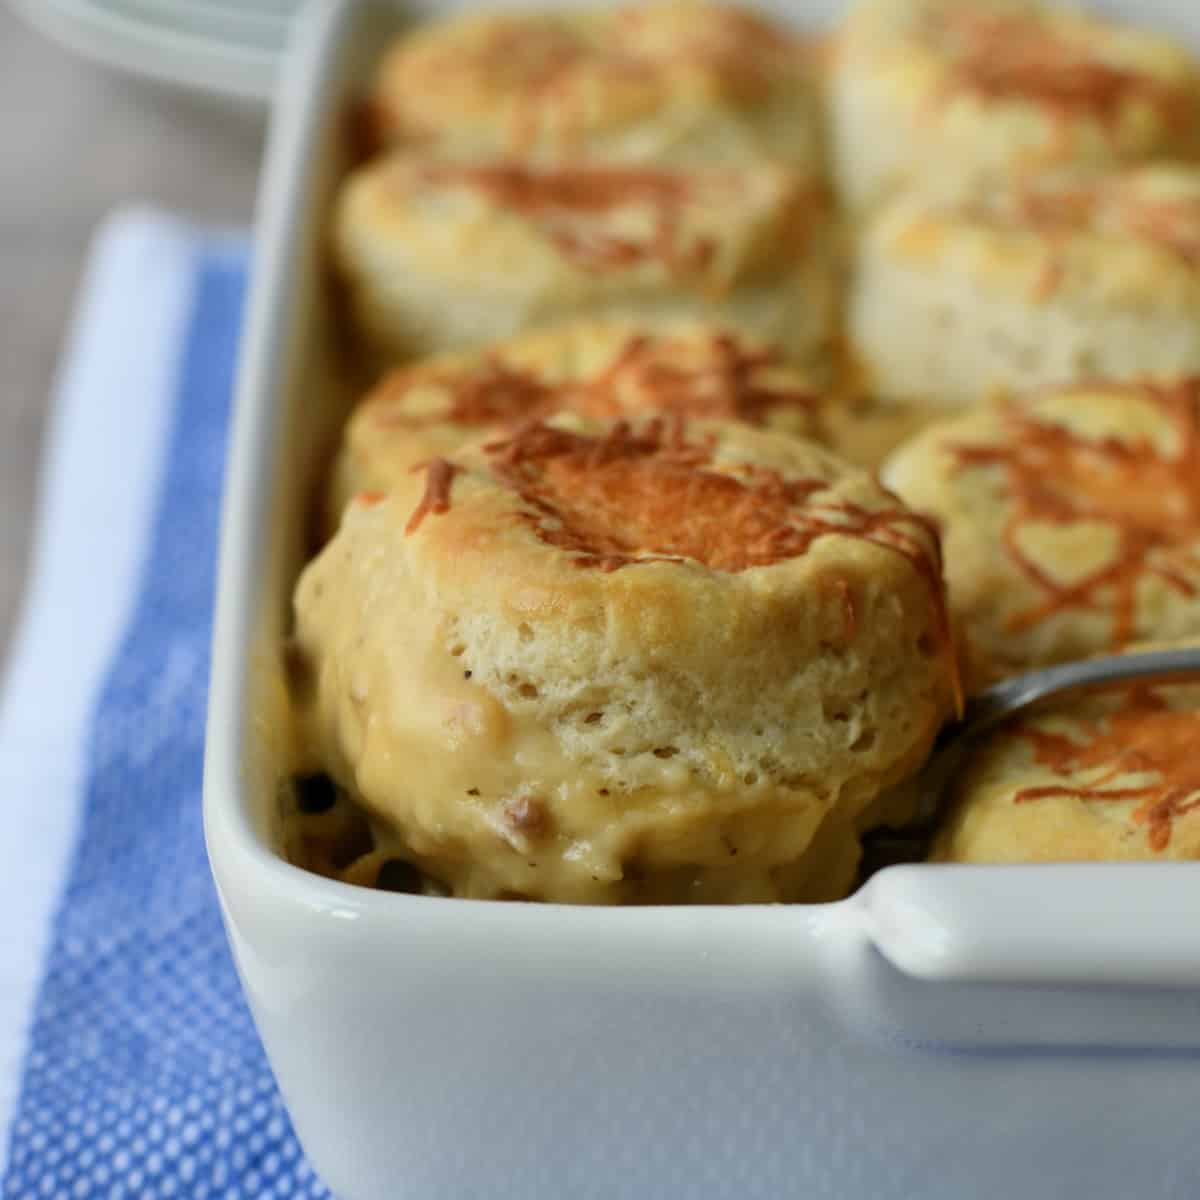 Cheesy biscuit lifted out of white casserole dish.